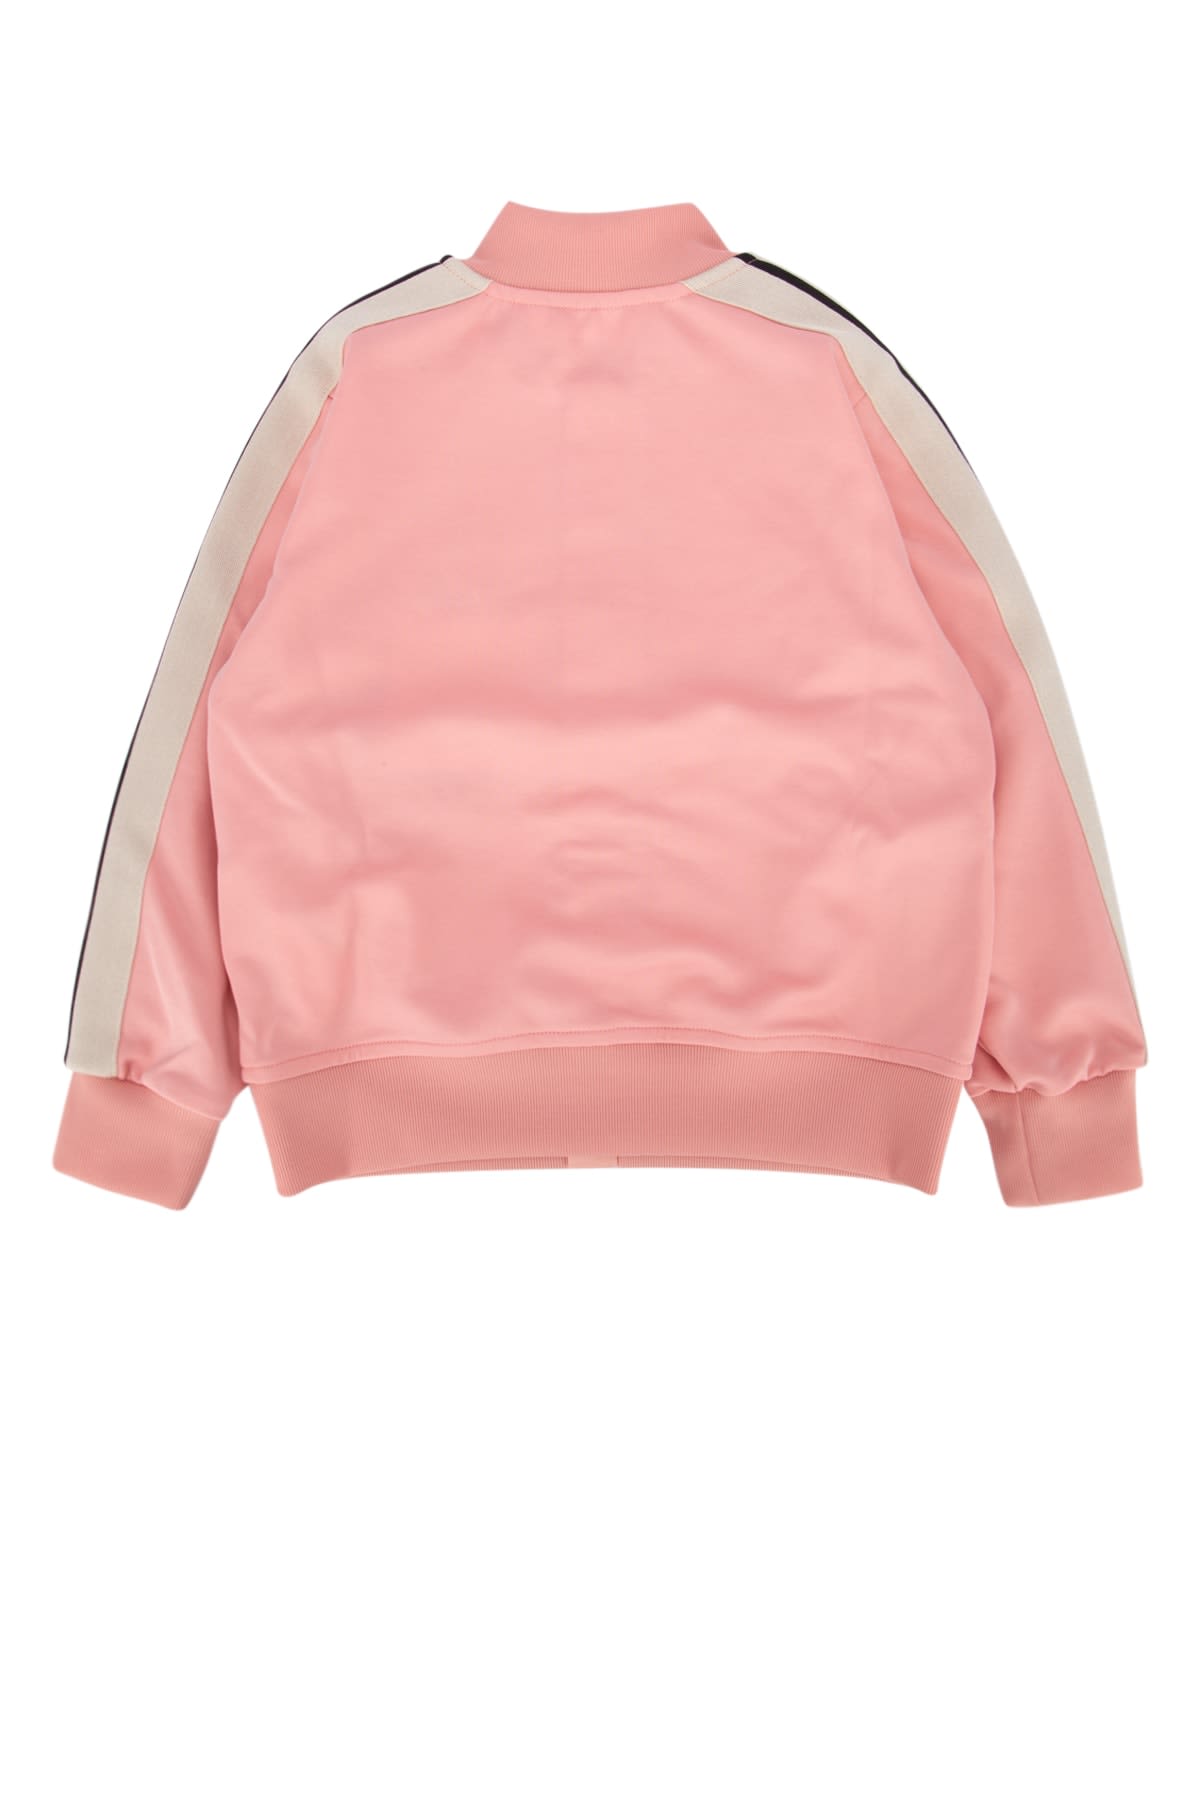 Palm Angels Kids' Giacca In Pinkoffwhite